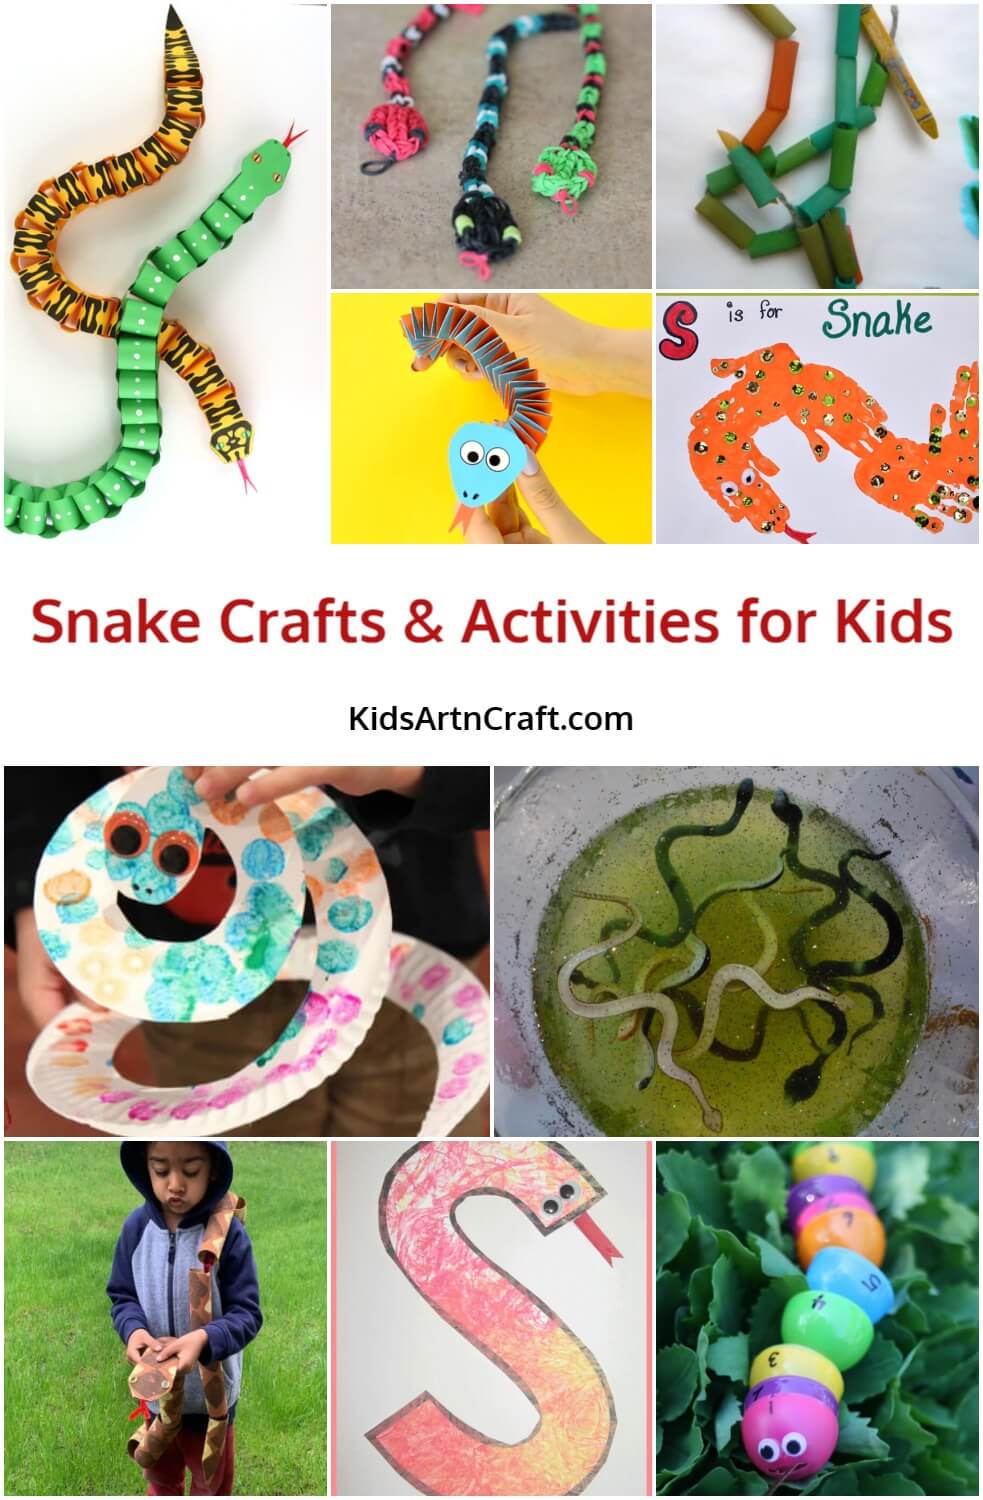 Snake Crafts & Activities for Kids